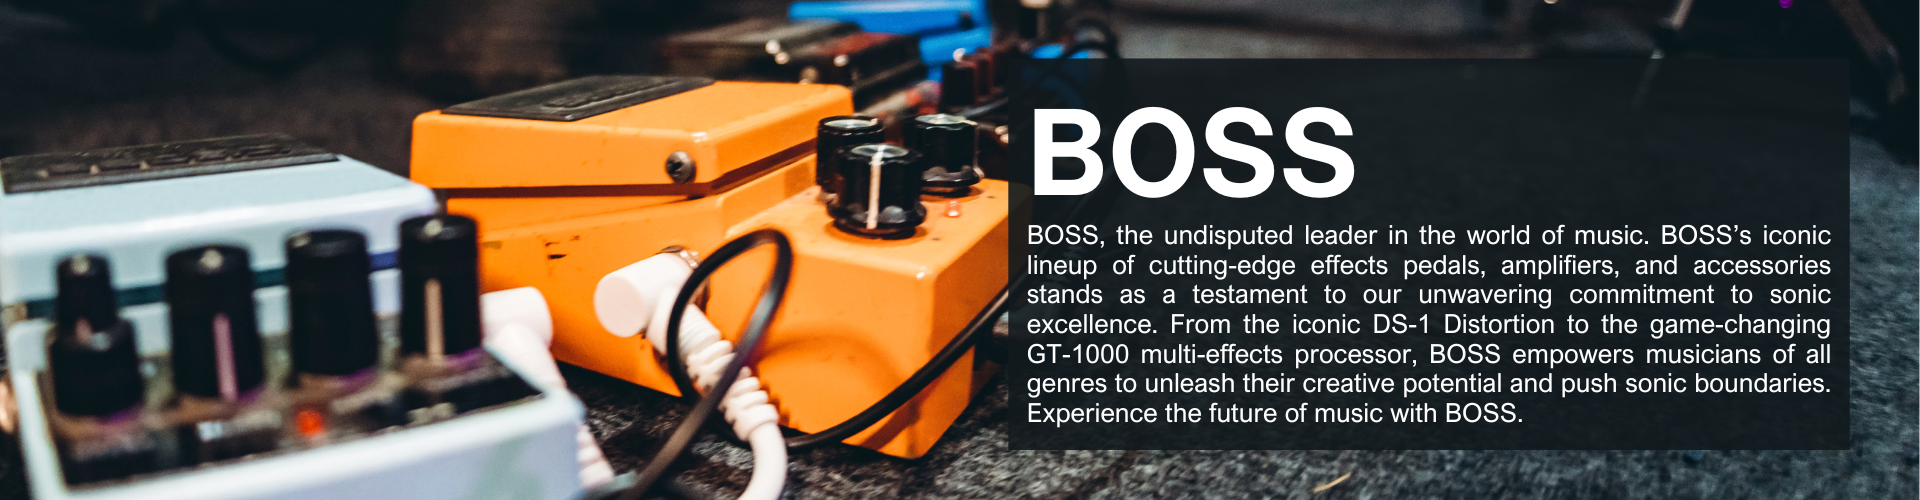 BOSS, the undisputed leader in the world of music. BOSS’s iconic lineup of cutting-edge effects pedals, amplifiers, and accessories stands as a testament to our unwavering commitment to sonic excellence. From the iconic DS-1 Distortion to the game-changing GT-1000 multi-effects processor, BOSS empowers musicians of all genres to unleash their creative potential and push sonic boundaries. Experience the future of music with BOSS.